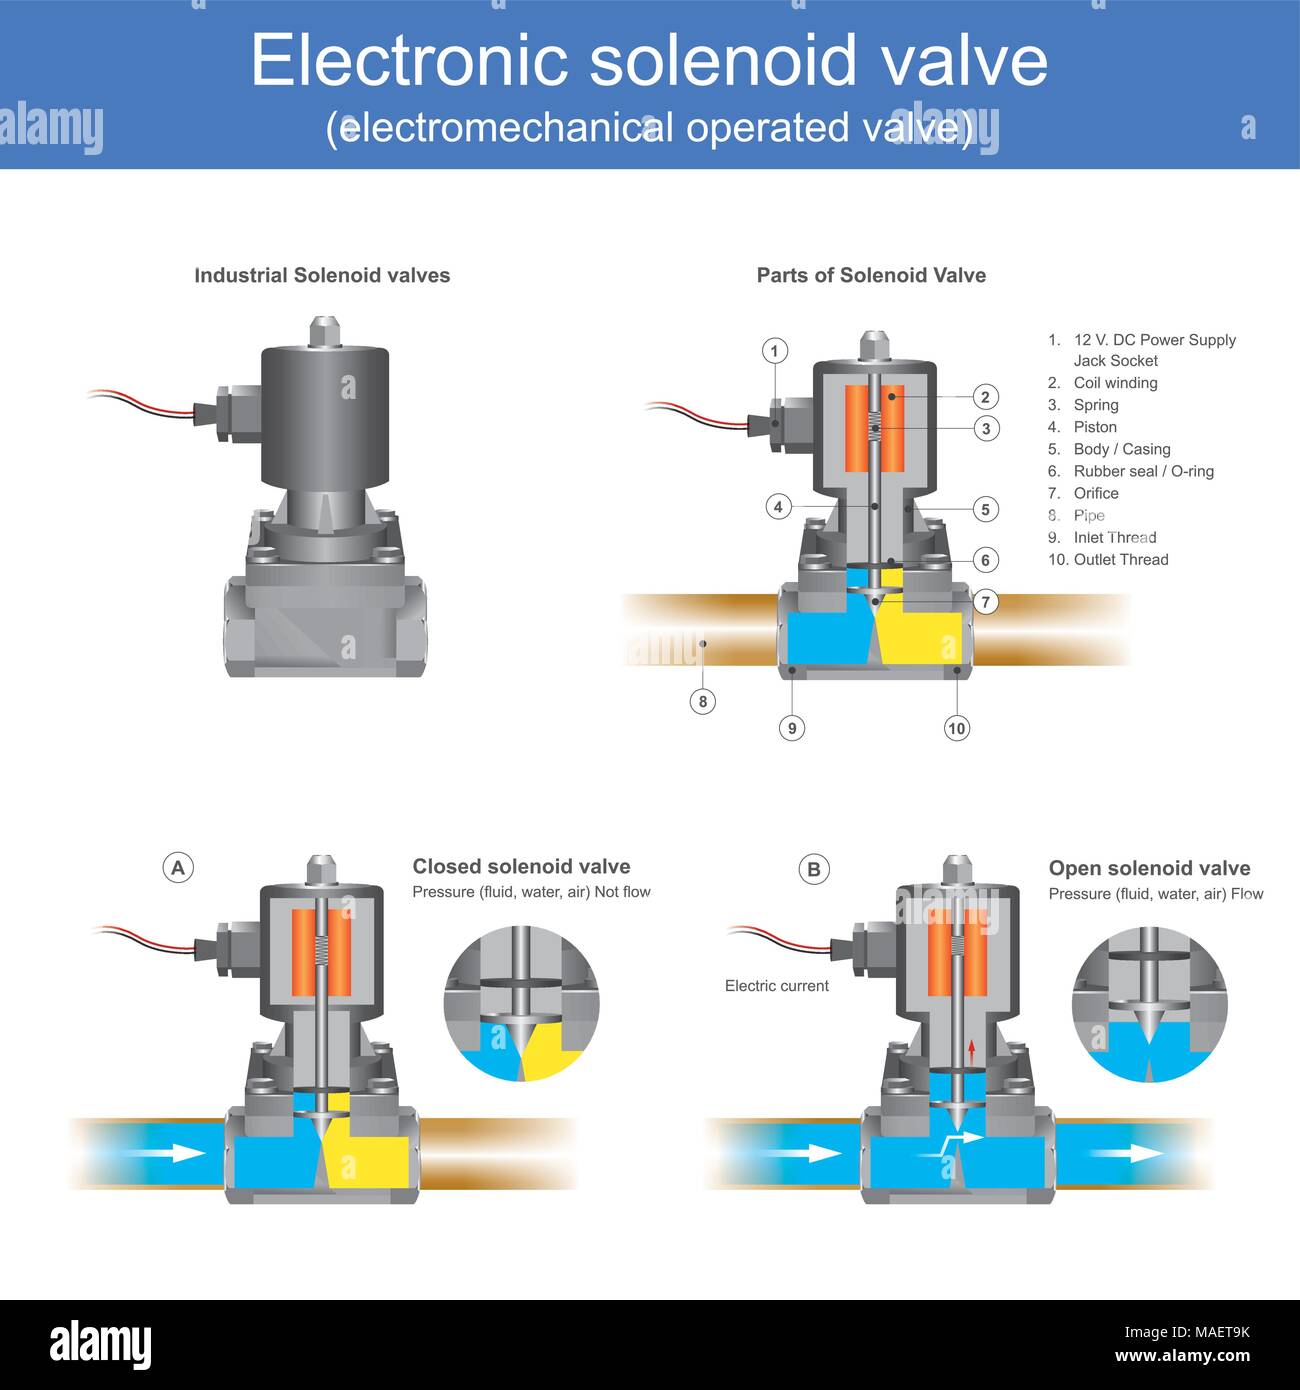 Electromechanical operated valve the solenoid valve it have a case of a